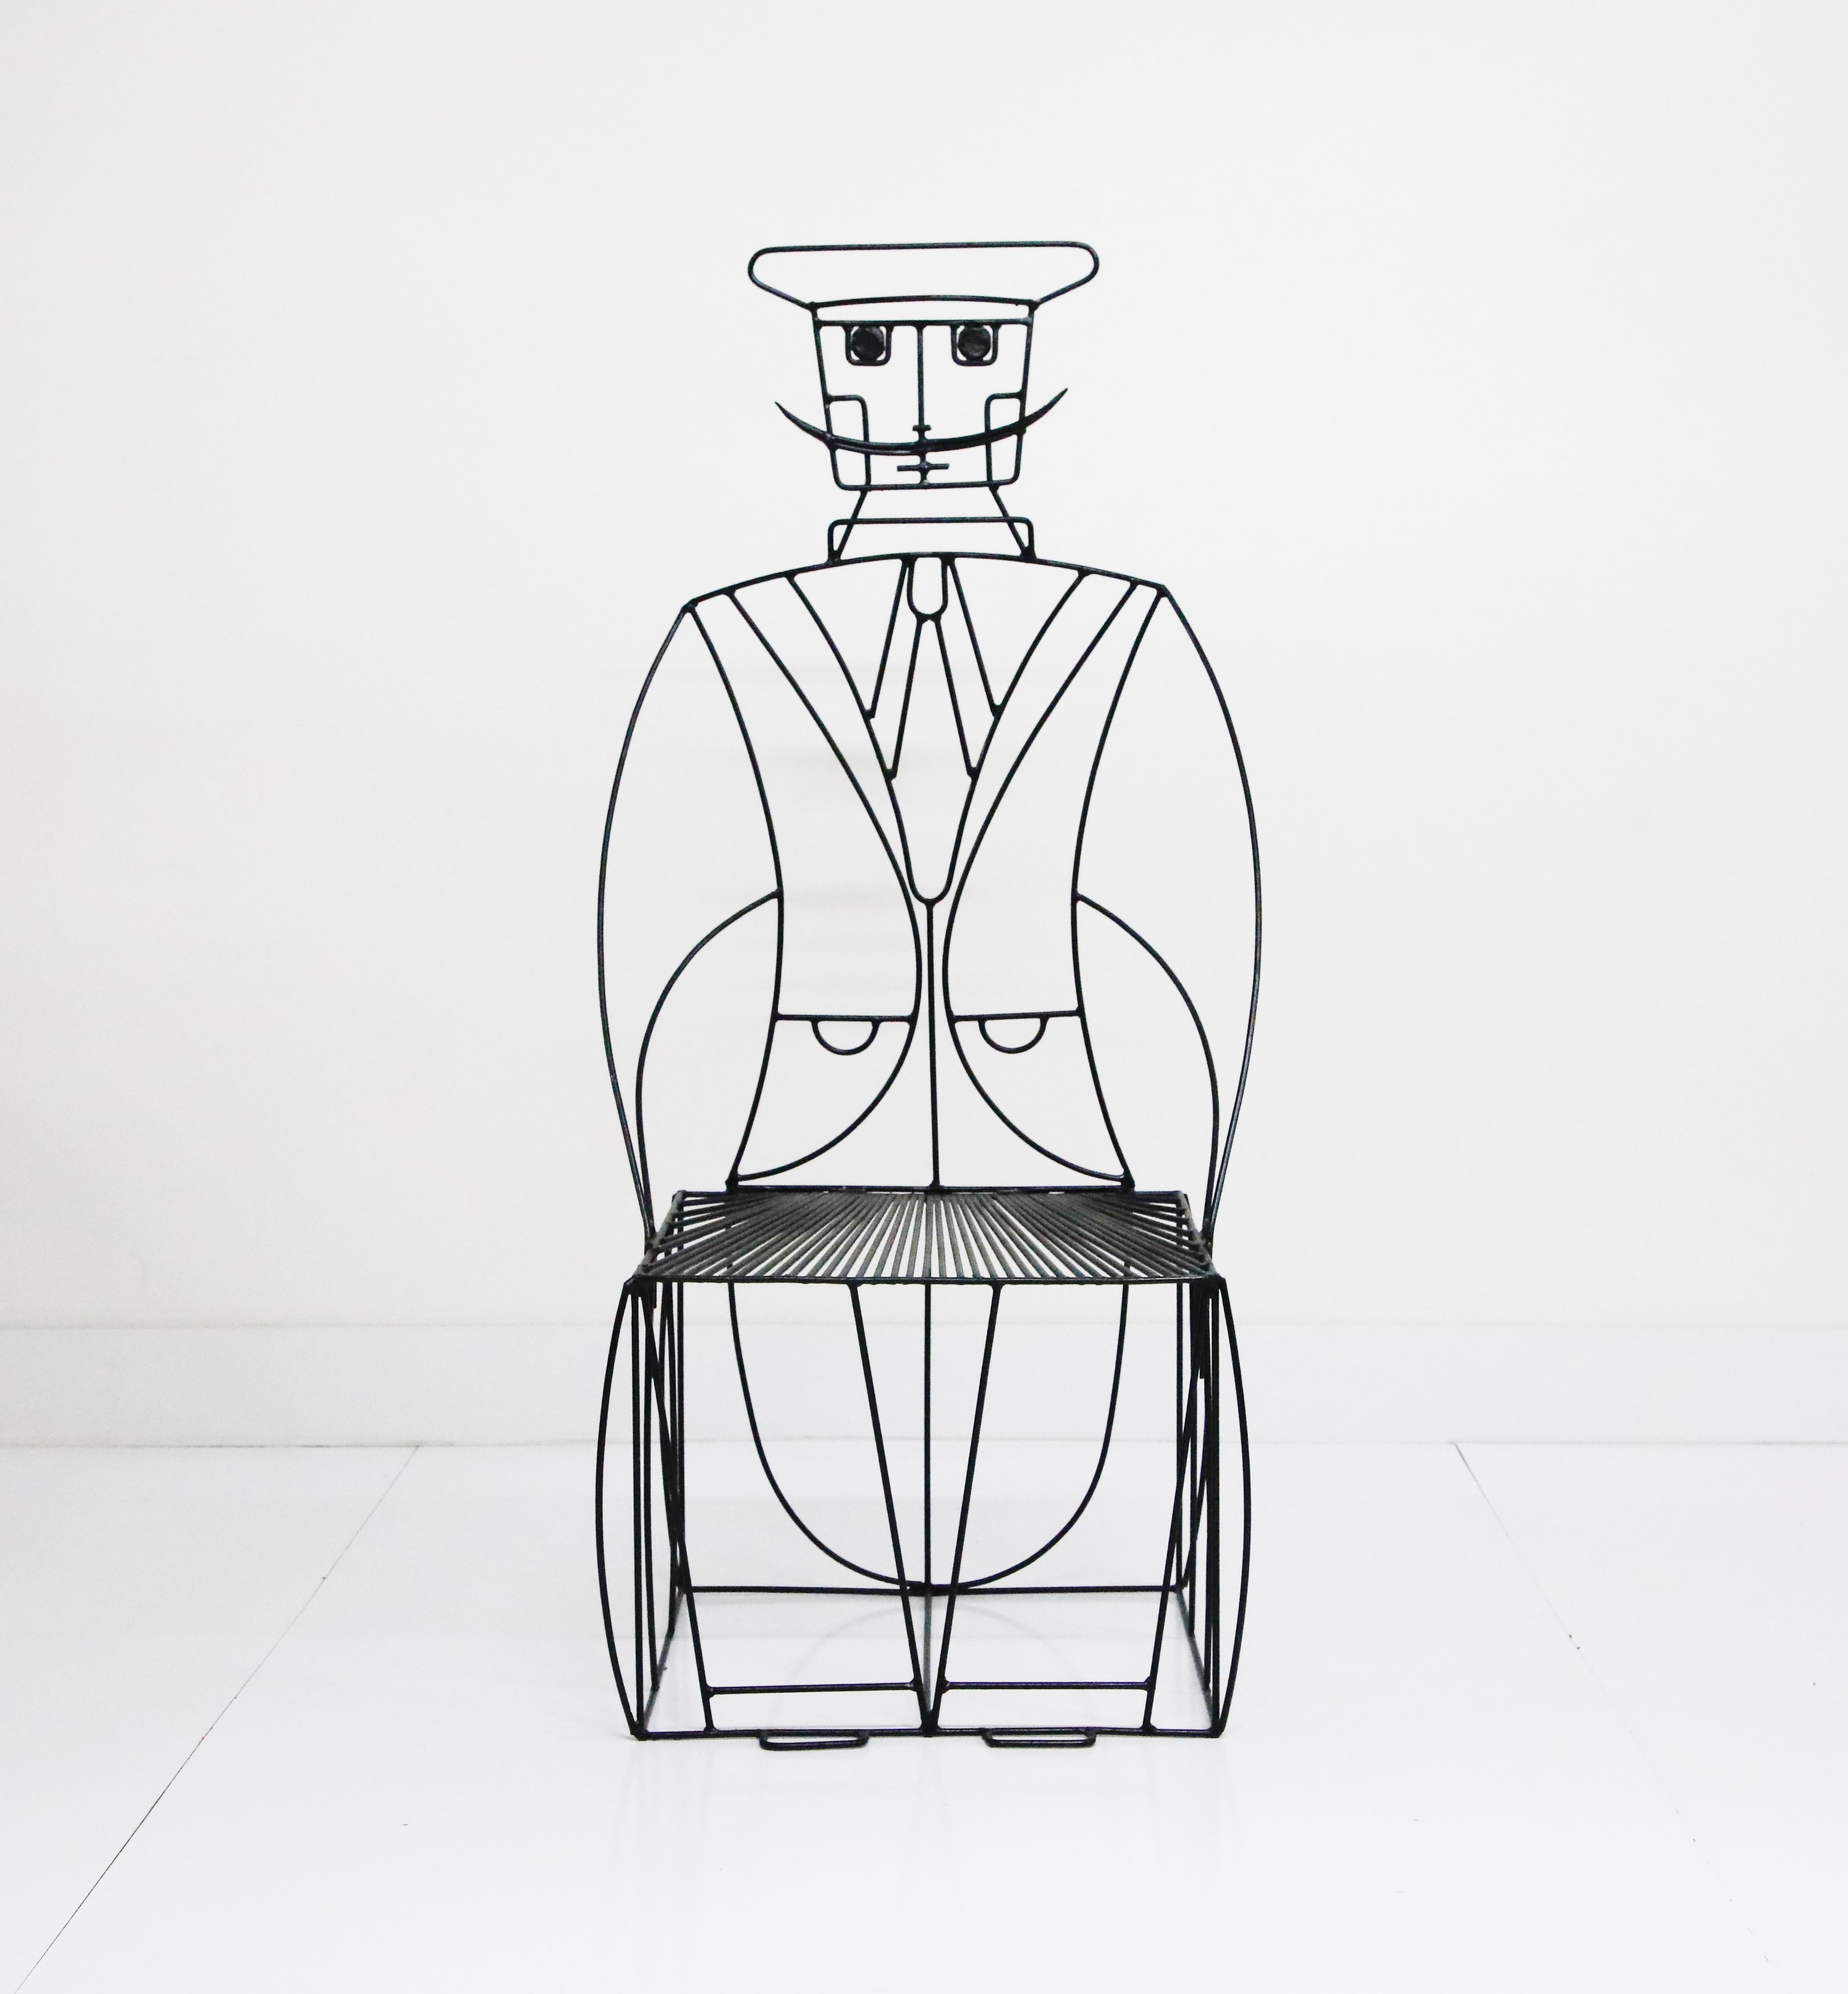 This incredible anthropomorphic 'Moustache Man' chair by John Risley (1919-2002) was crafted from iron then powder coated in black, during the 1960s in his Middletown Connecticut workshop. Can be used indoors or outdoors, this example is in